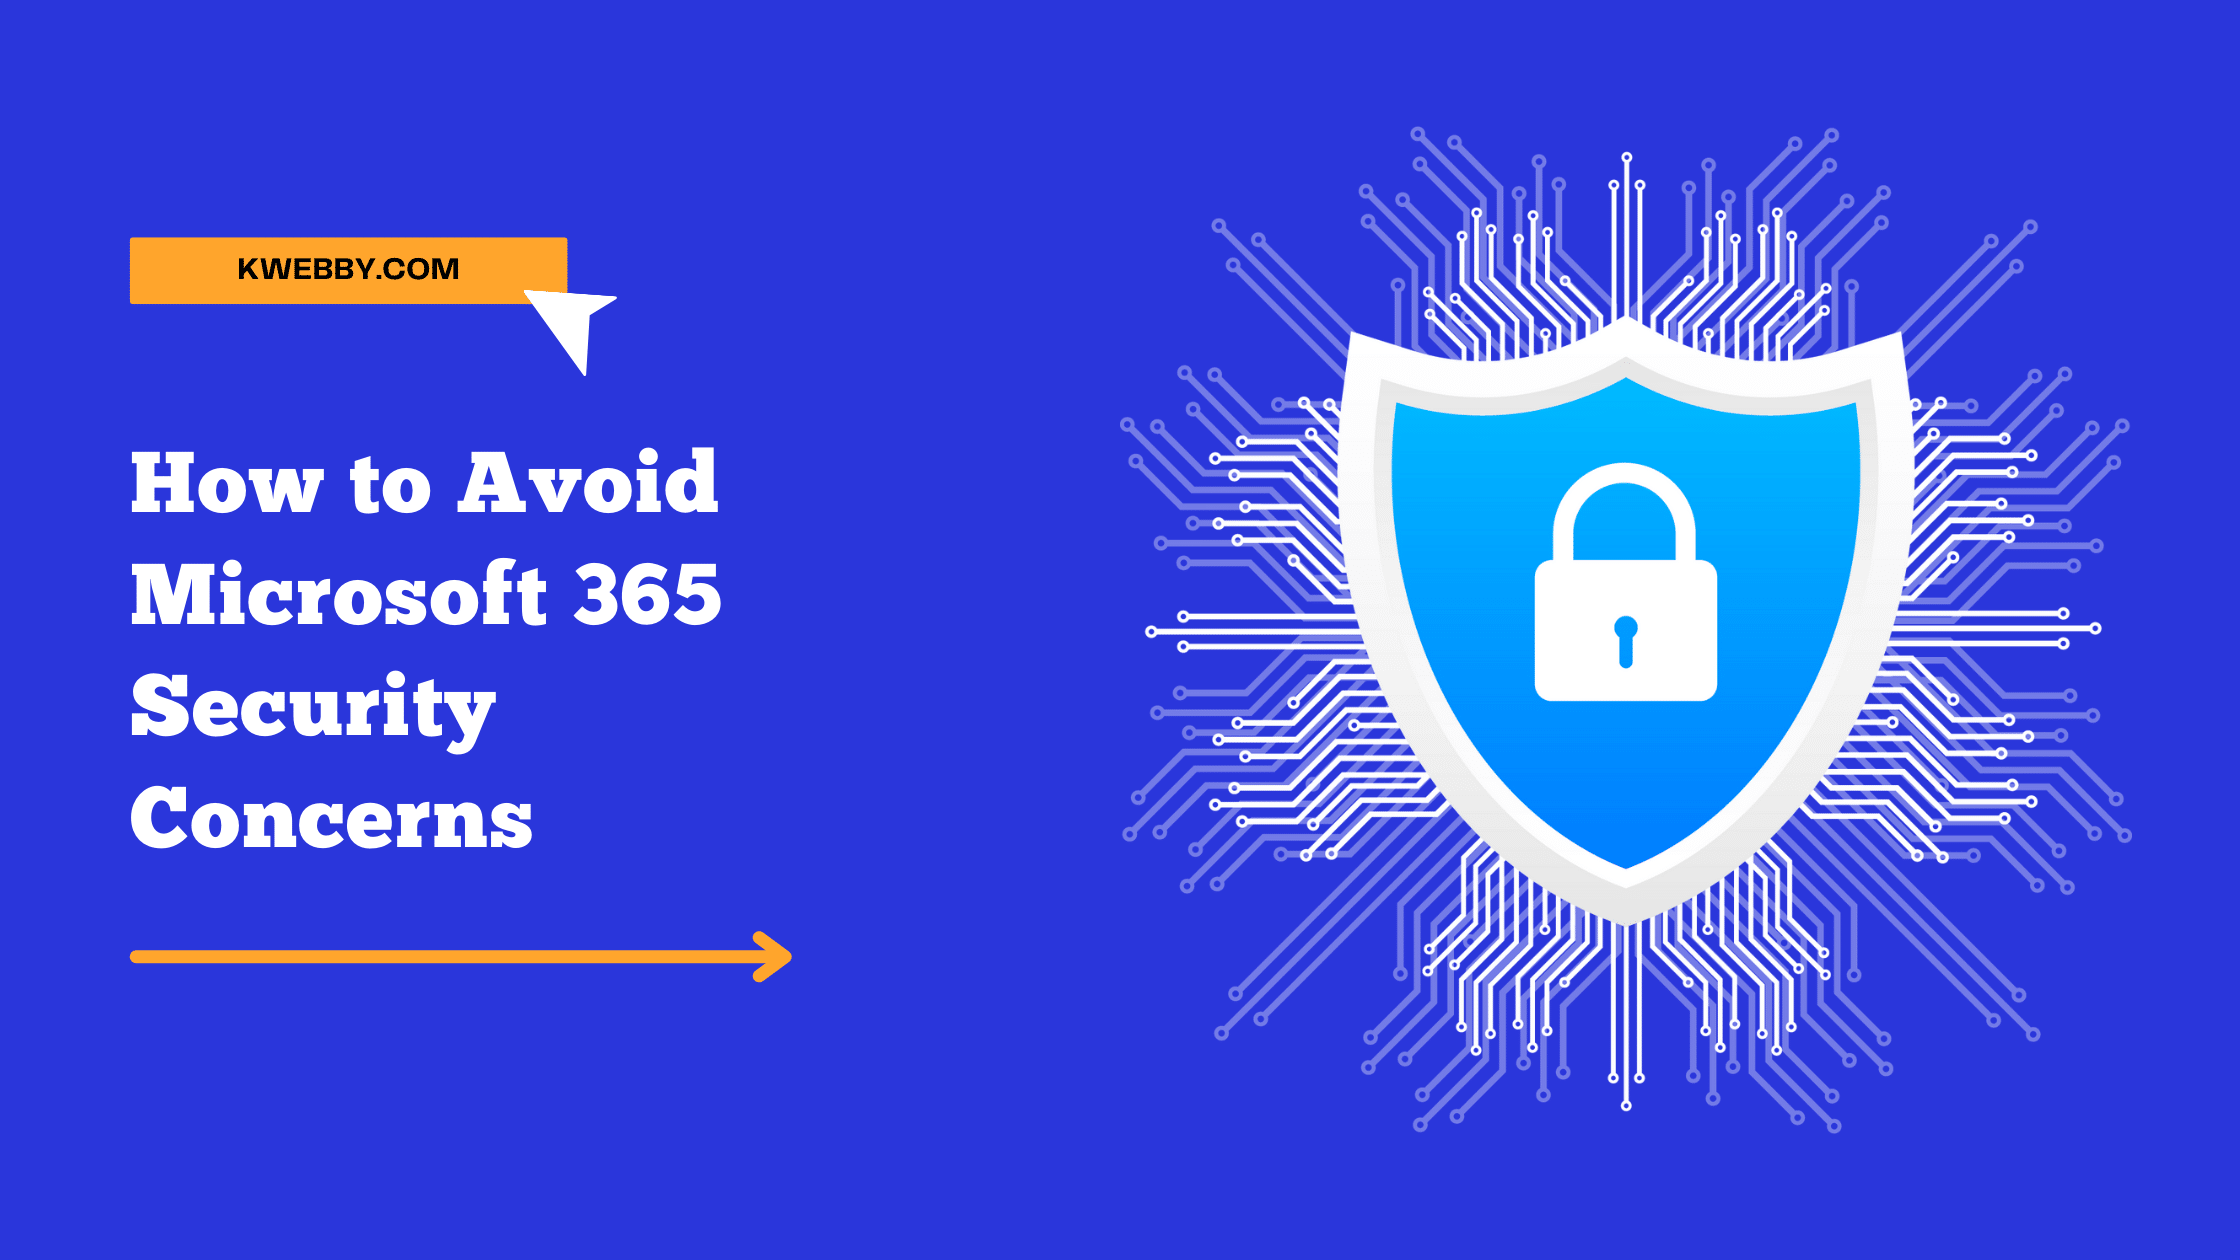 How to Avoid Microsoft 365 Security Concerns